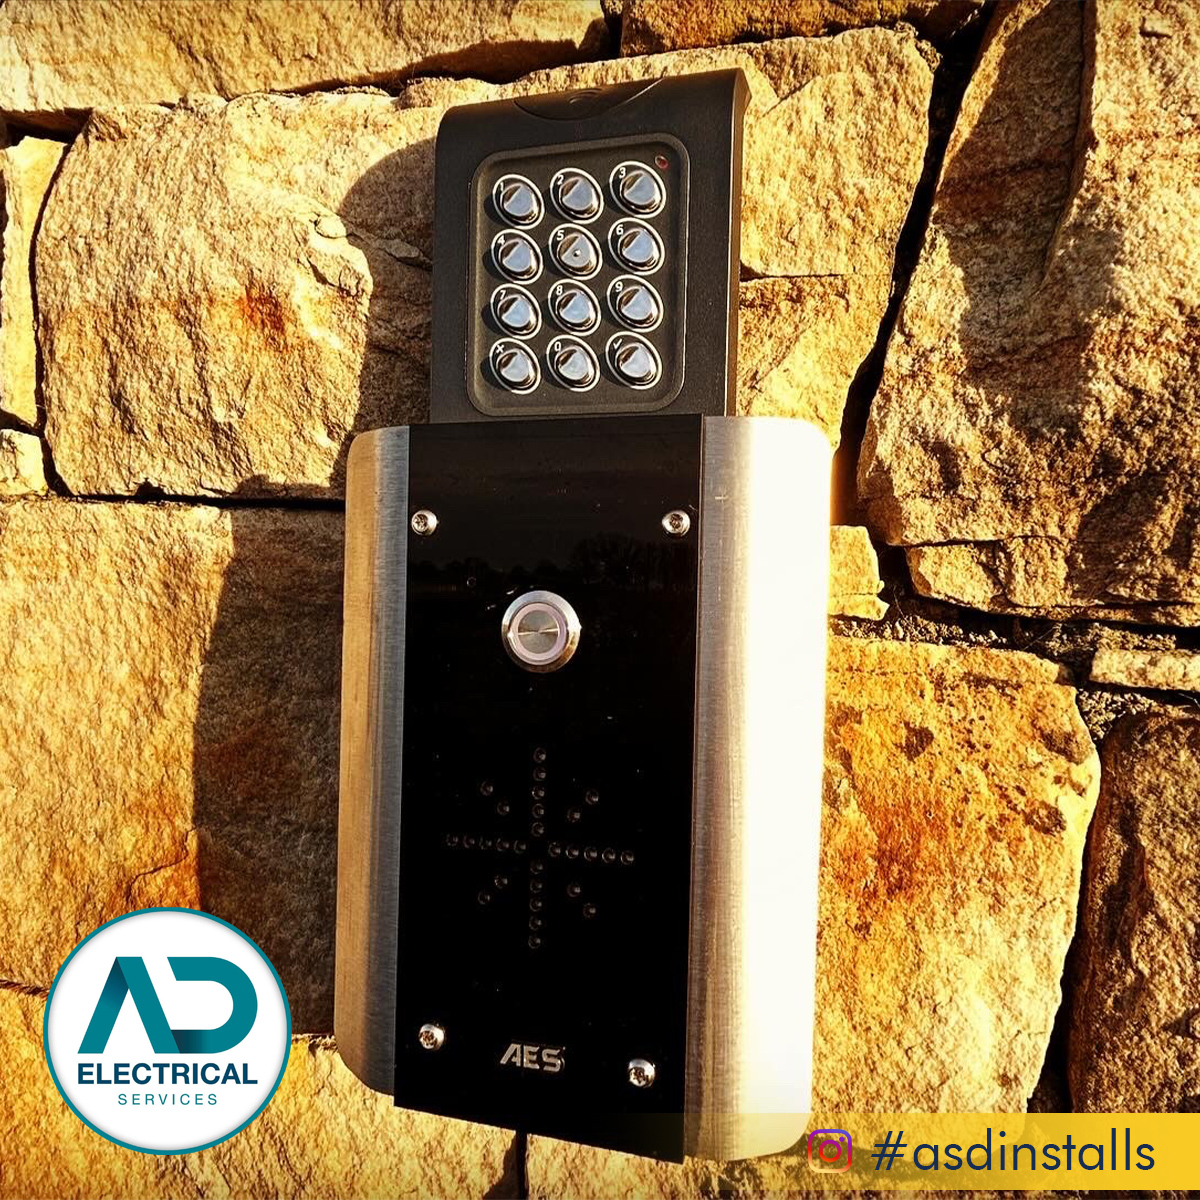 Great install by AD Electrical Services! The installation of the Nice Hyke 24V Gate Automation System paired with the AES DECT 603 Wireless Intercom at a very satisfied customer's property
 #asdinstalls #NiceGroup #AESGlobal #gateautomation #intercom #Irishhomes #irishproperty